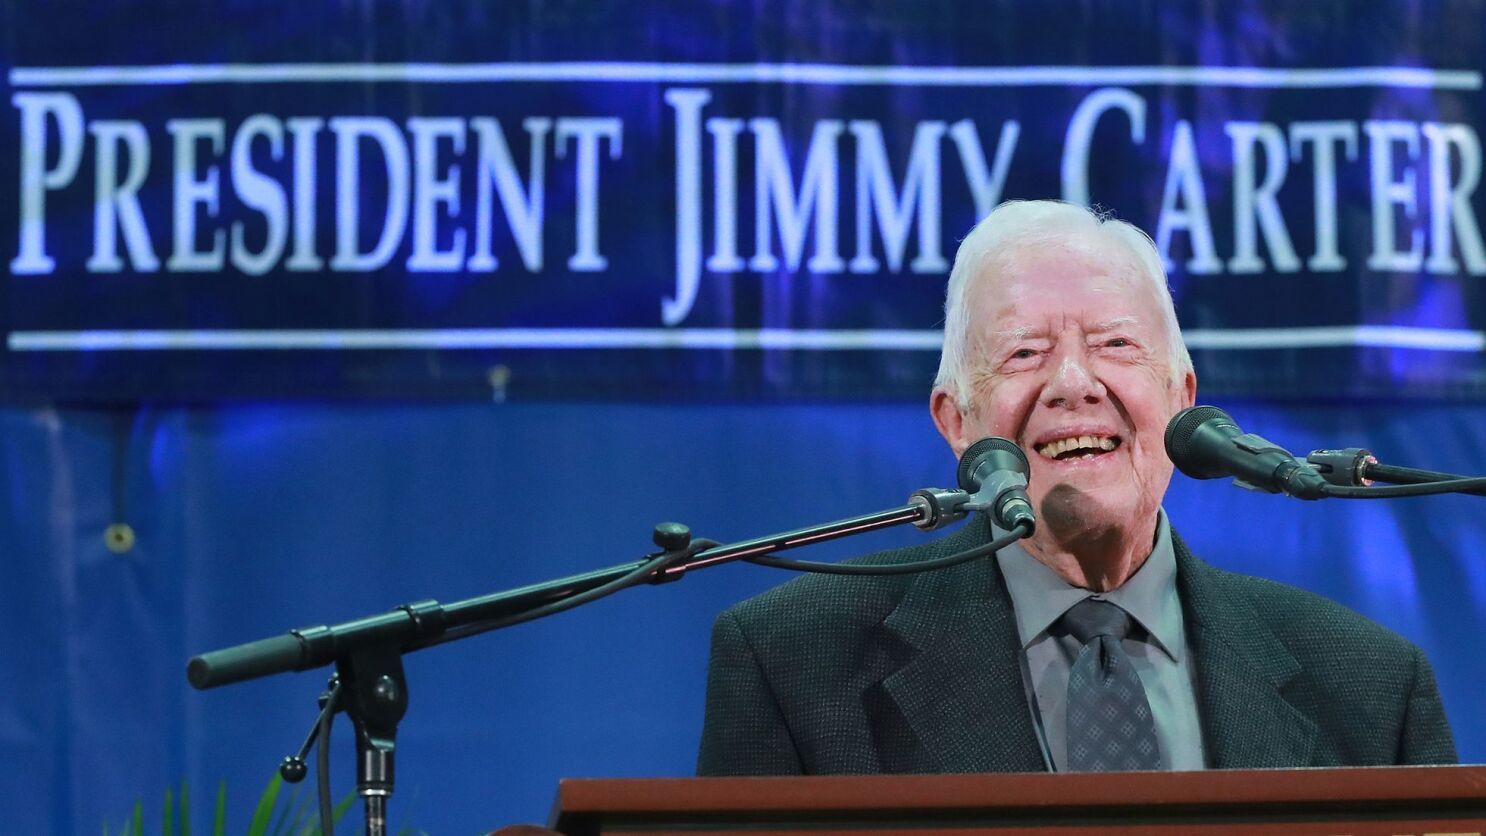 View Recent Jimmy Carter Now Gif